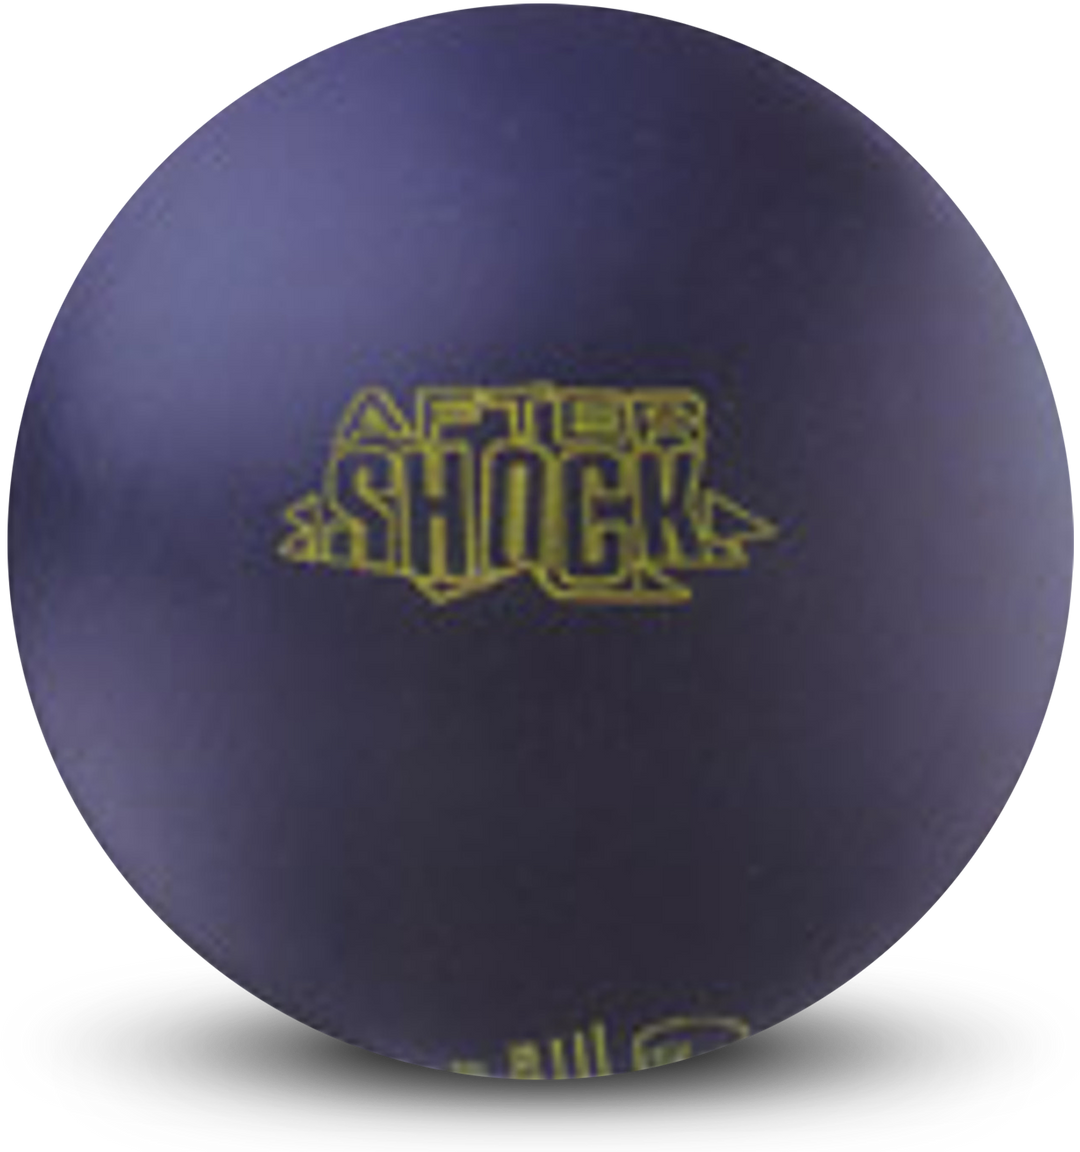 Aftershock Bowling Ball